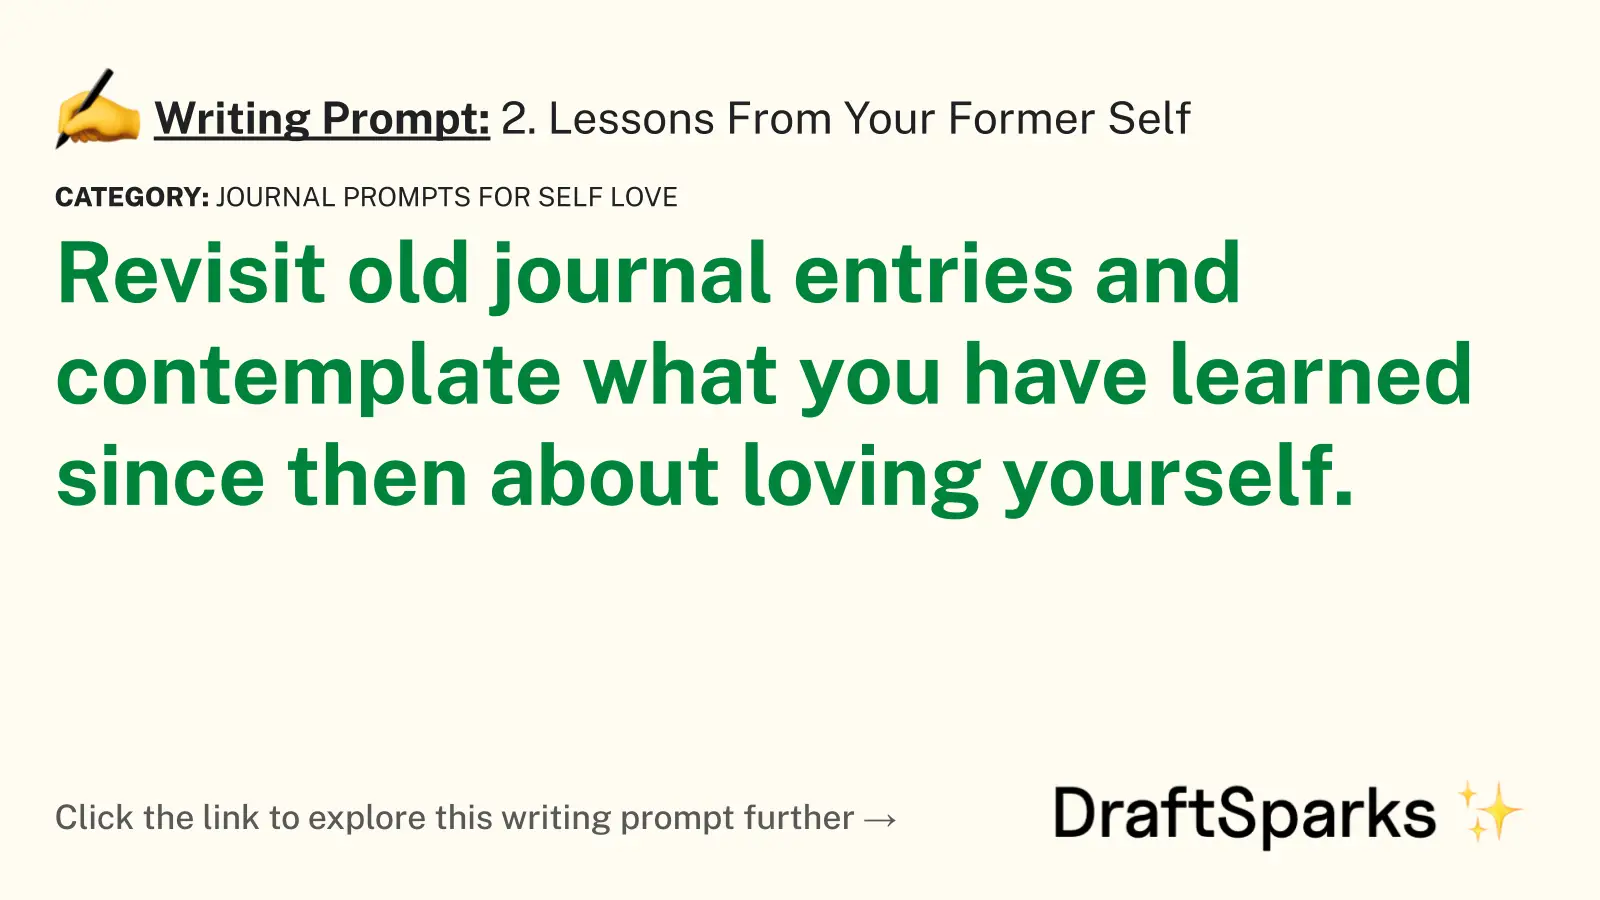 2. Lessons From Your Former Self